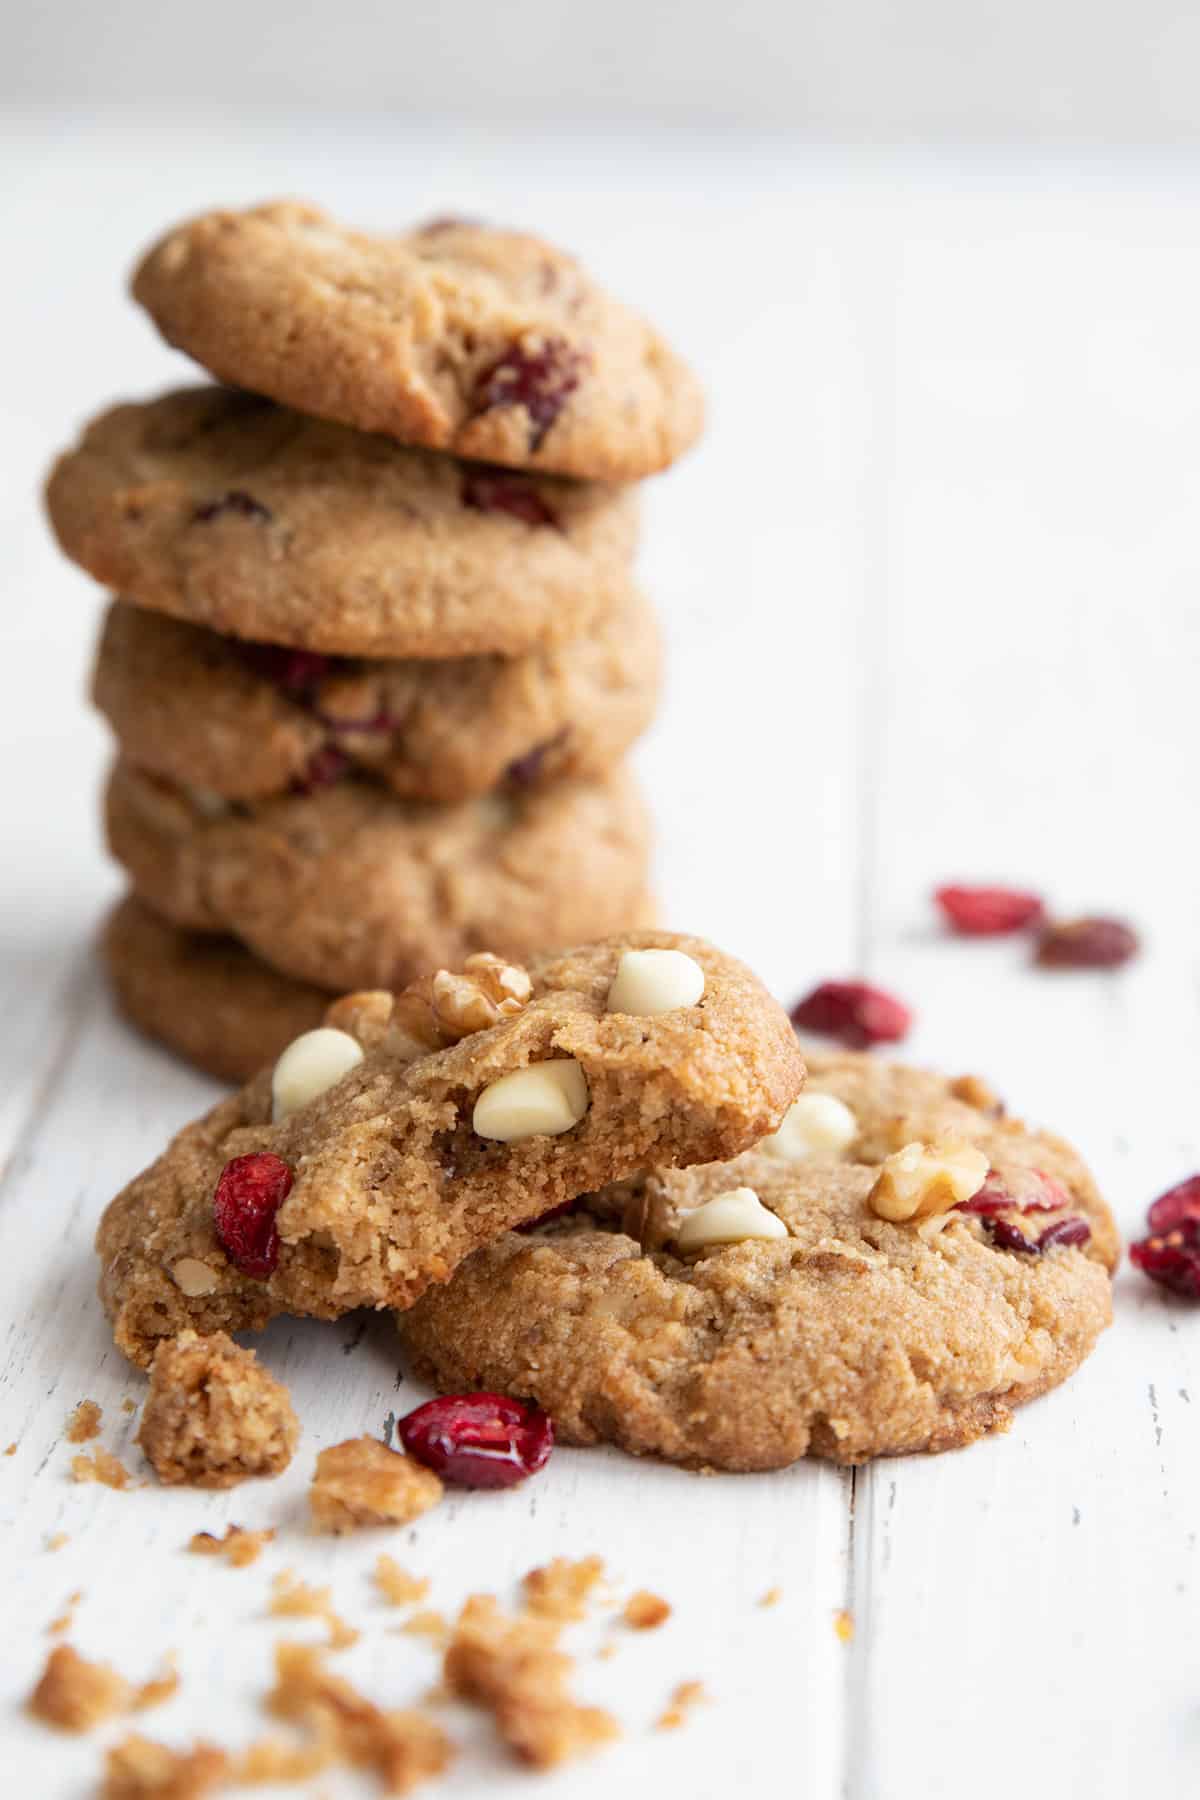 A stack of Keto White Chocolate Cranberry Cookies with one broken open in front.